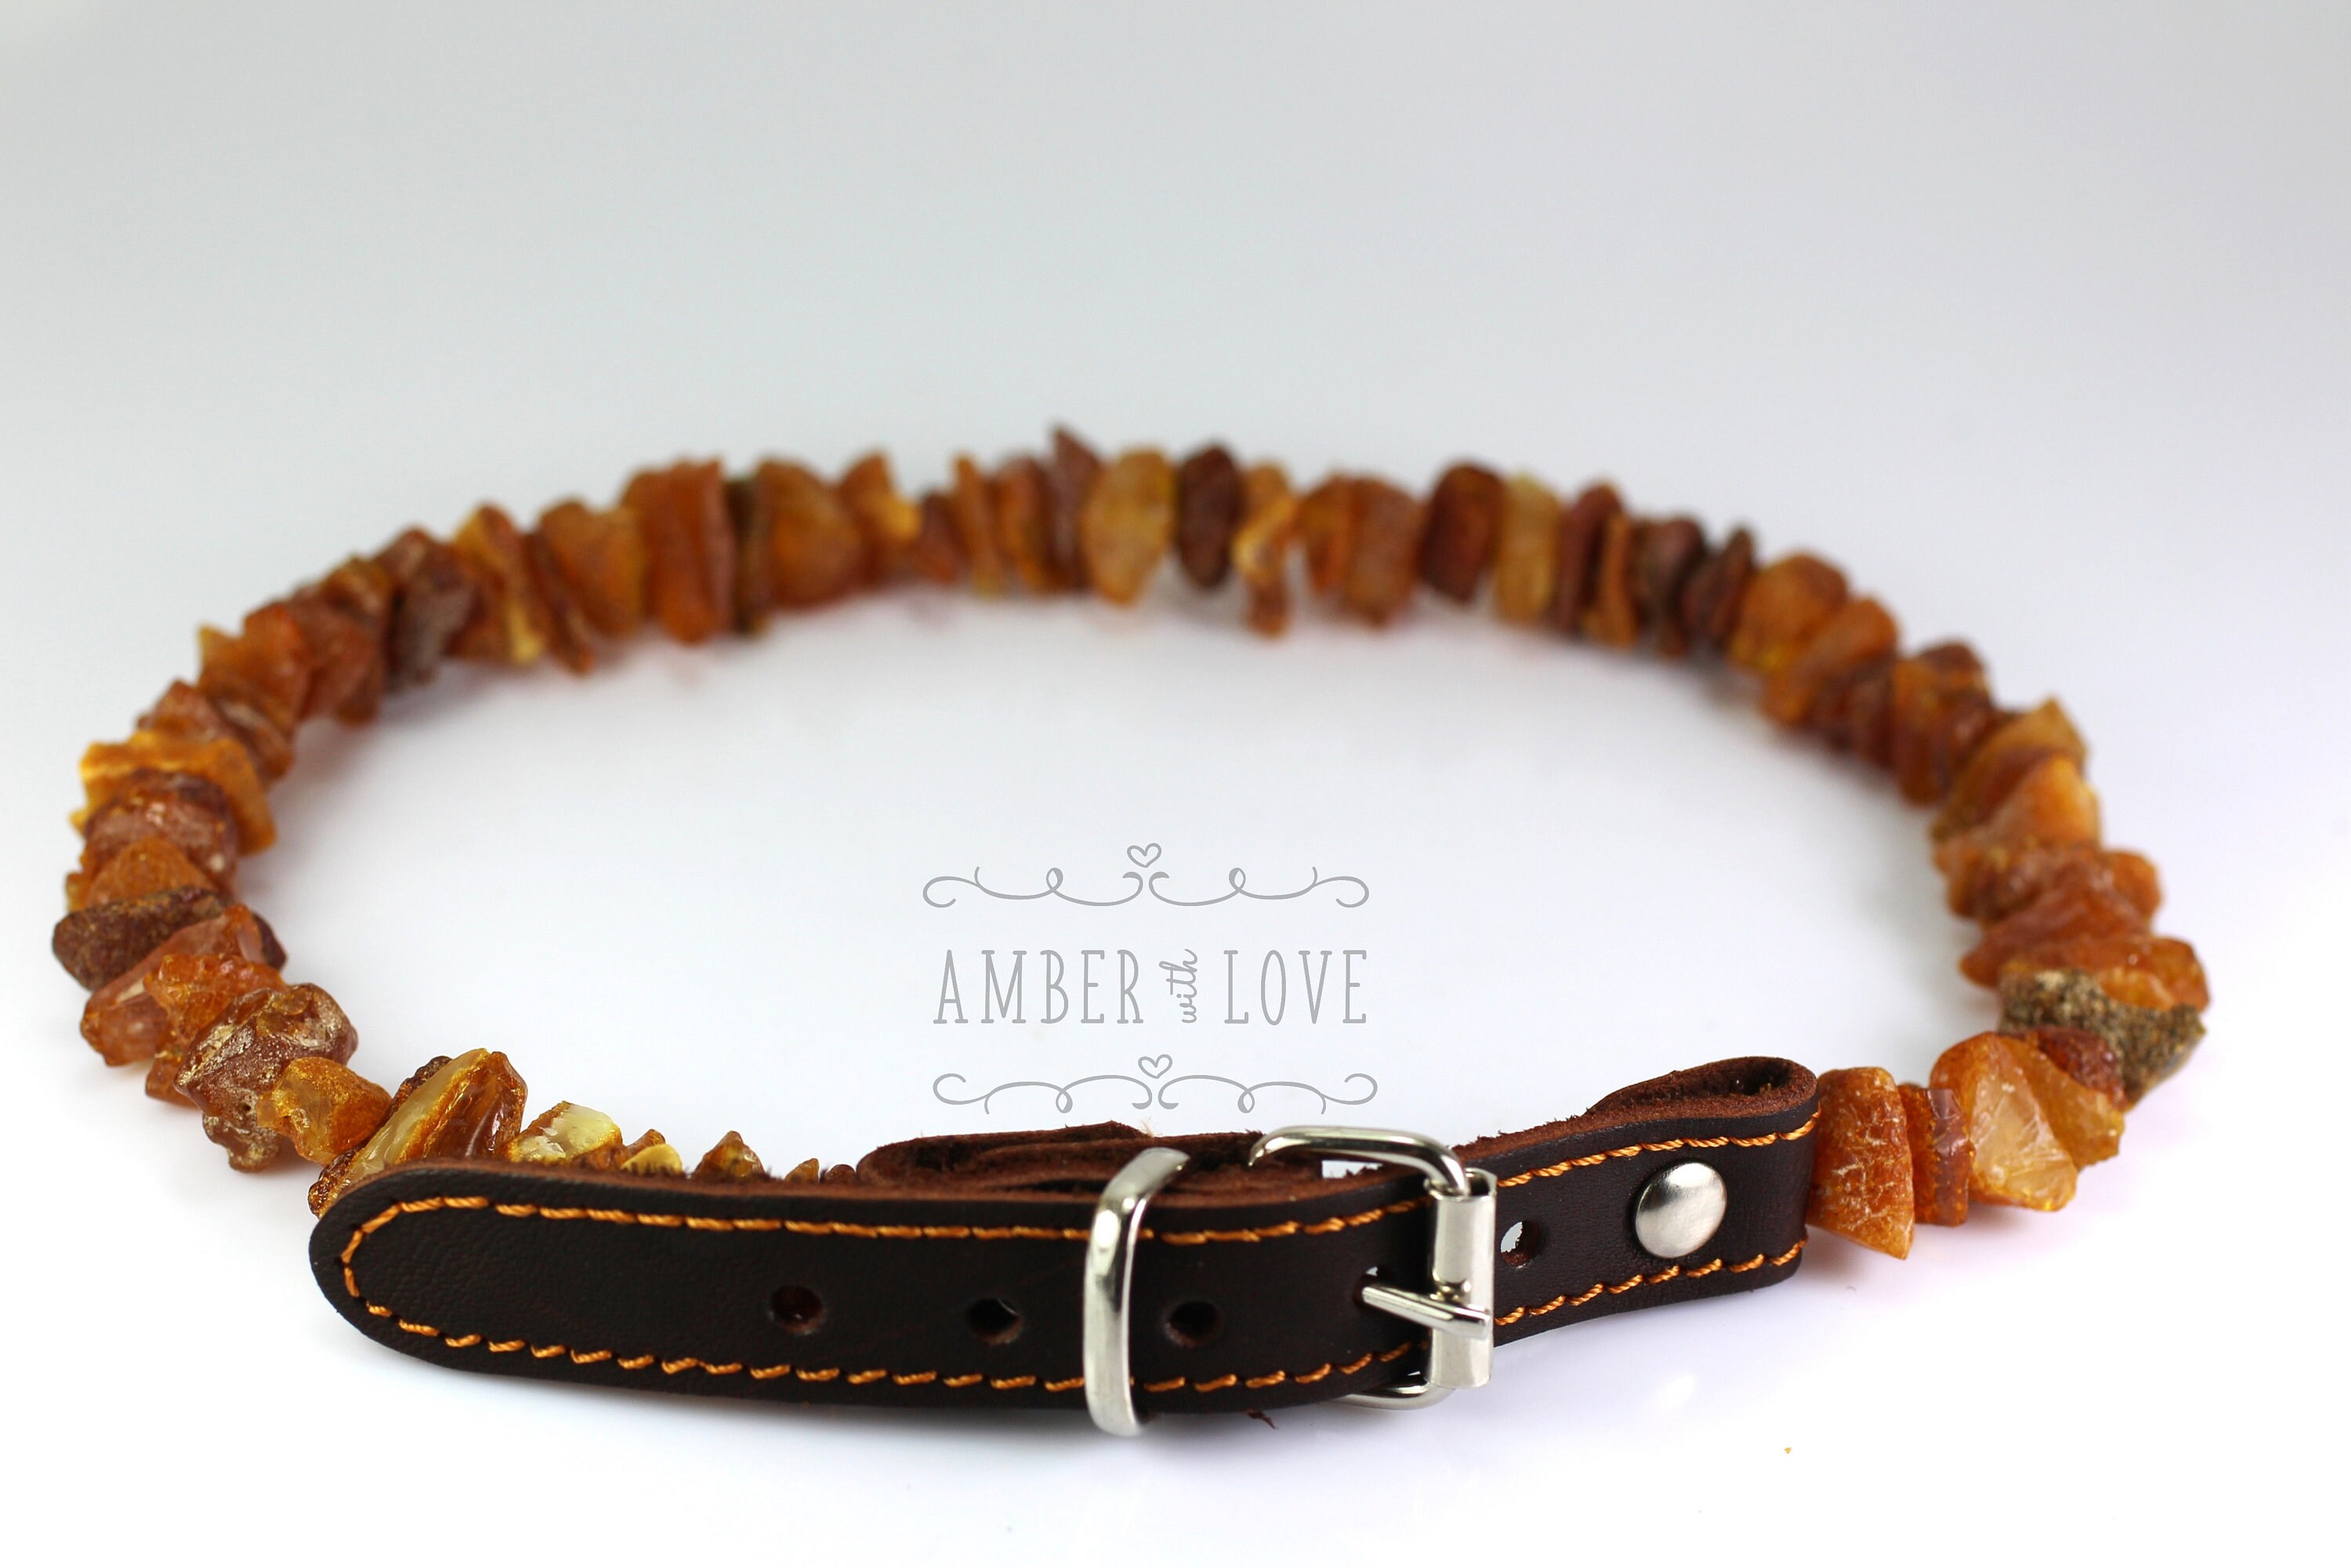 PetLove Amber Collar Made from 100 % Genuine Baltic Amber for Dogs and Cats